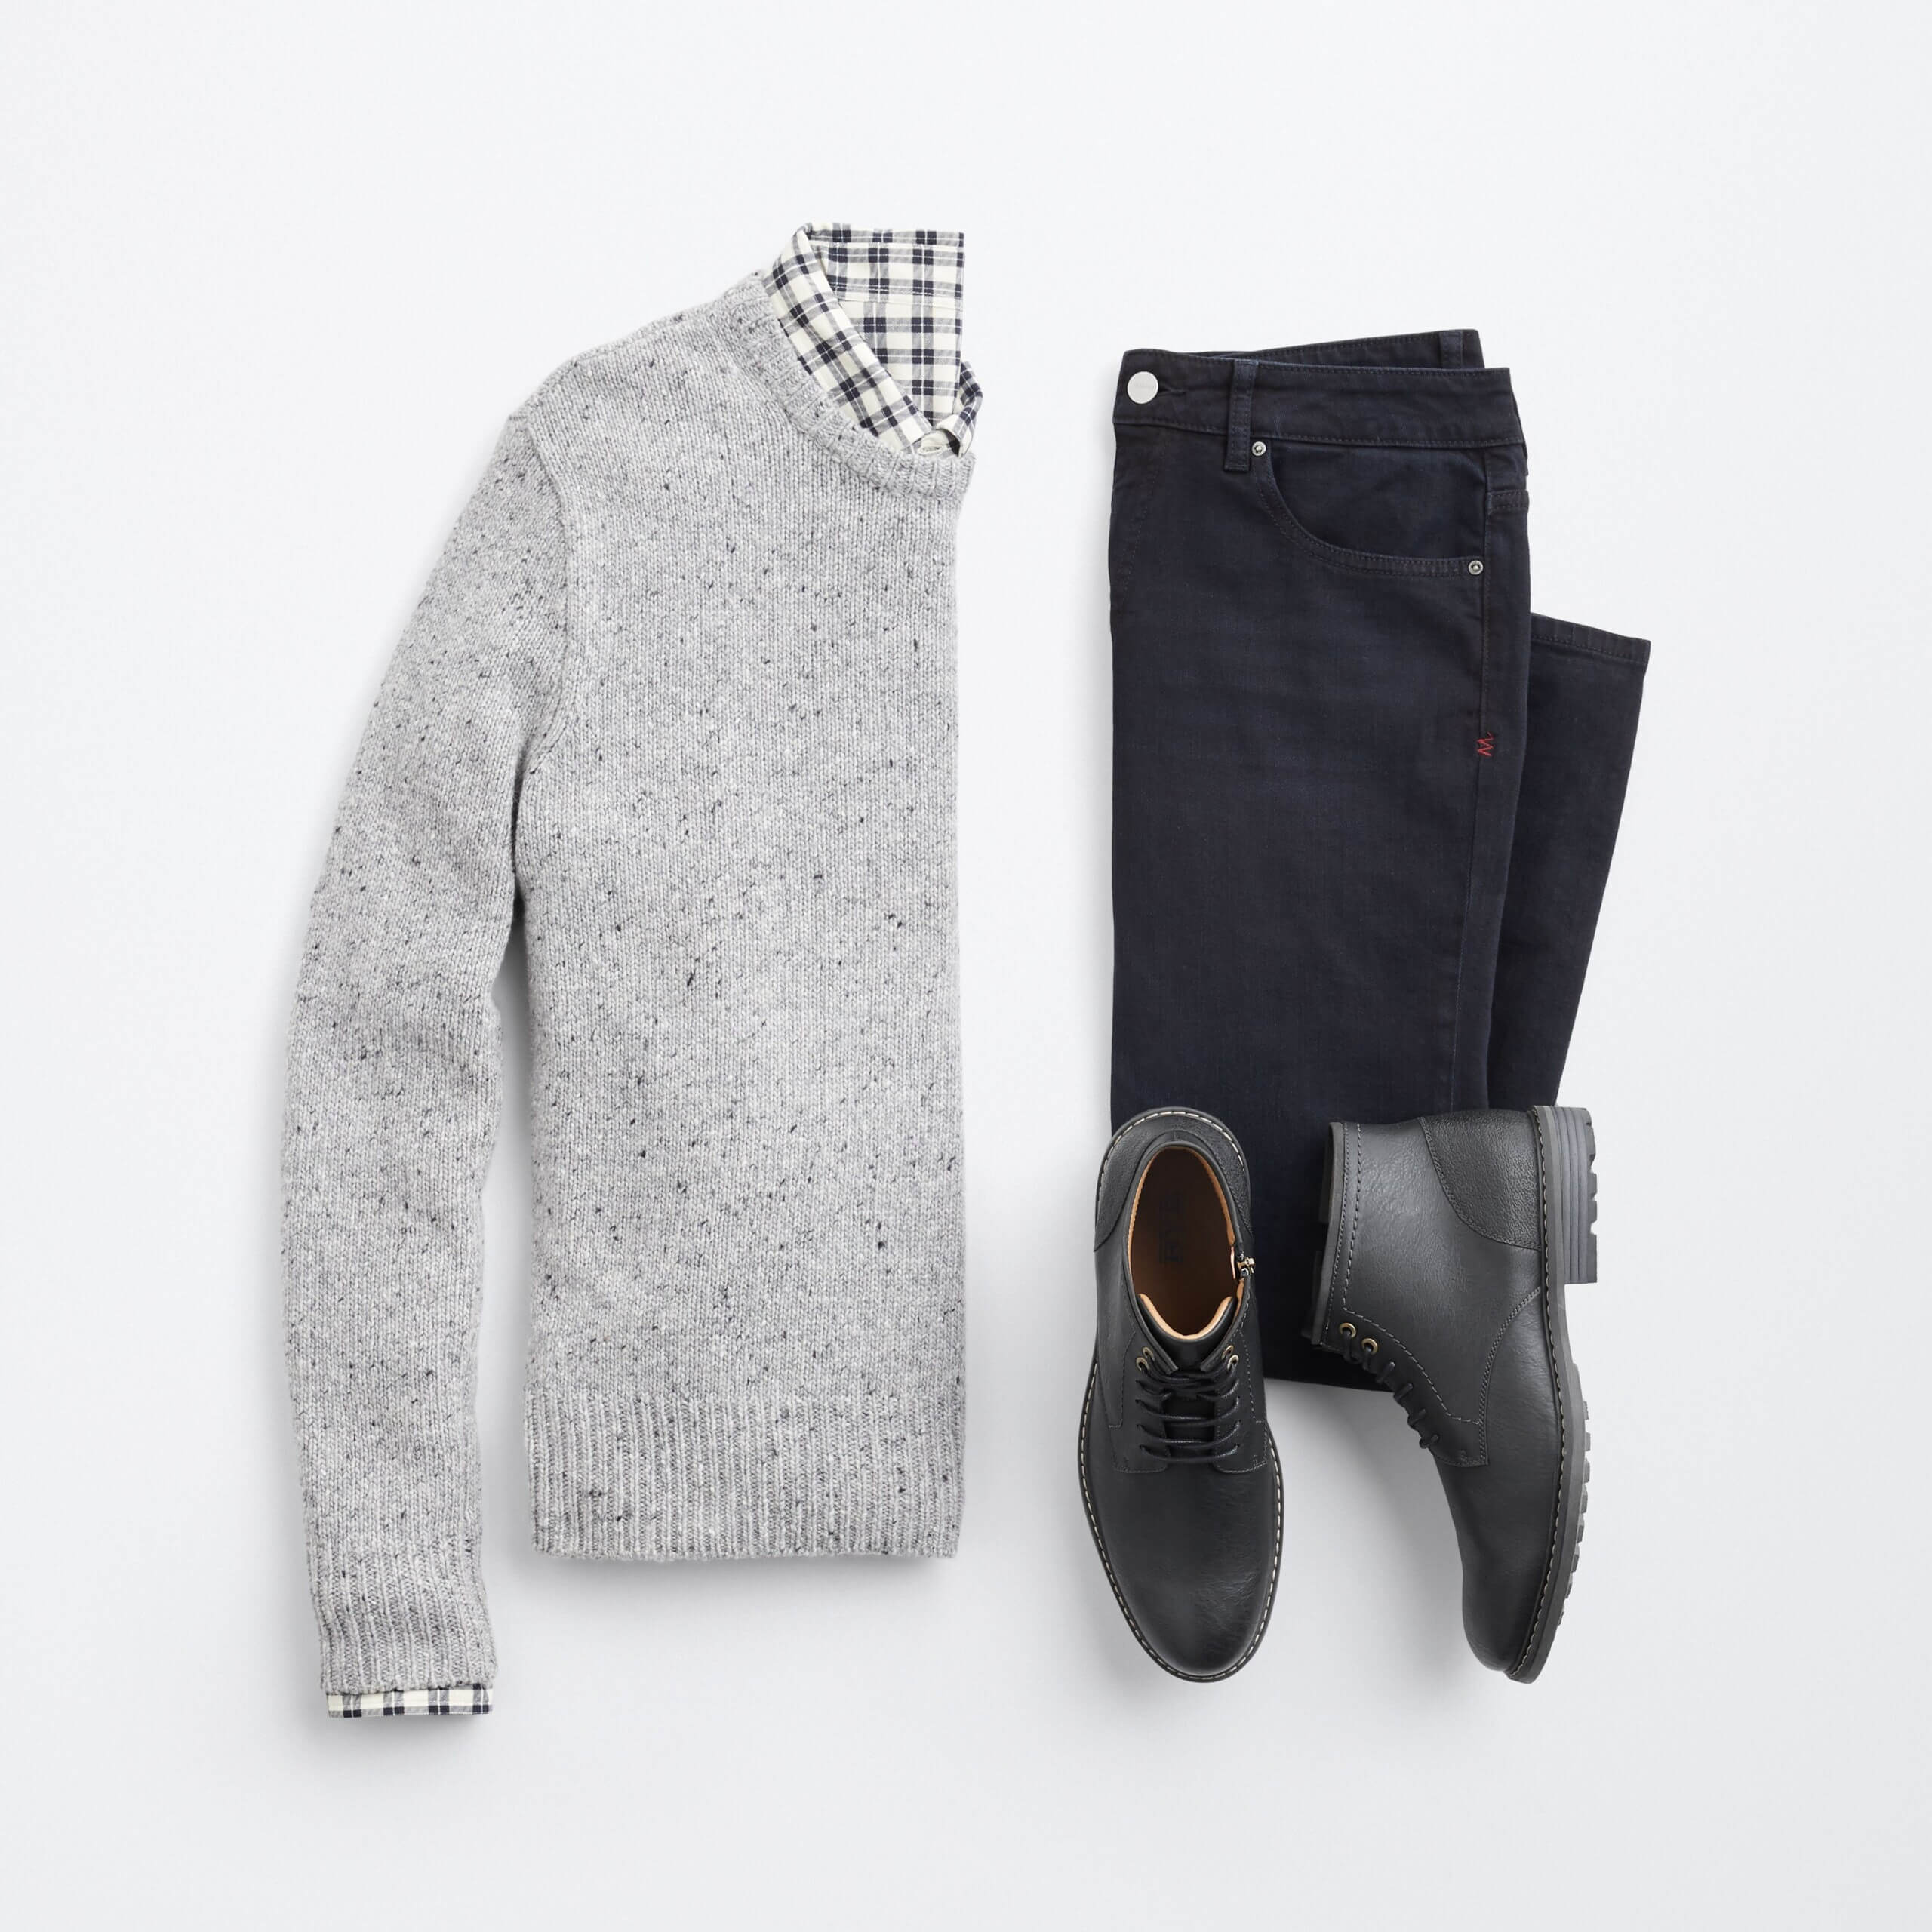 Stitch Fix Men's suit with gray pullover sweater, black and white plaid shirt, black jeans and black boots.